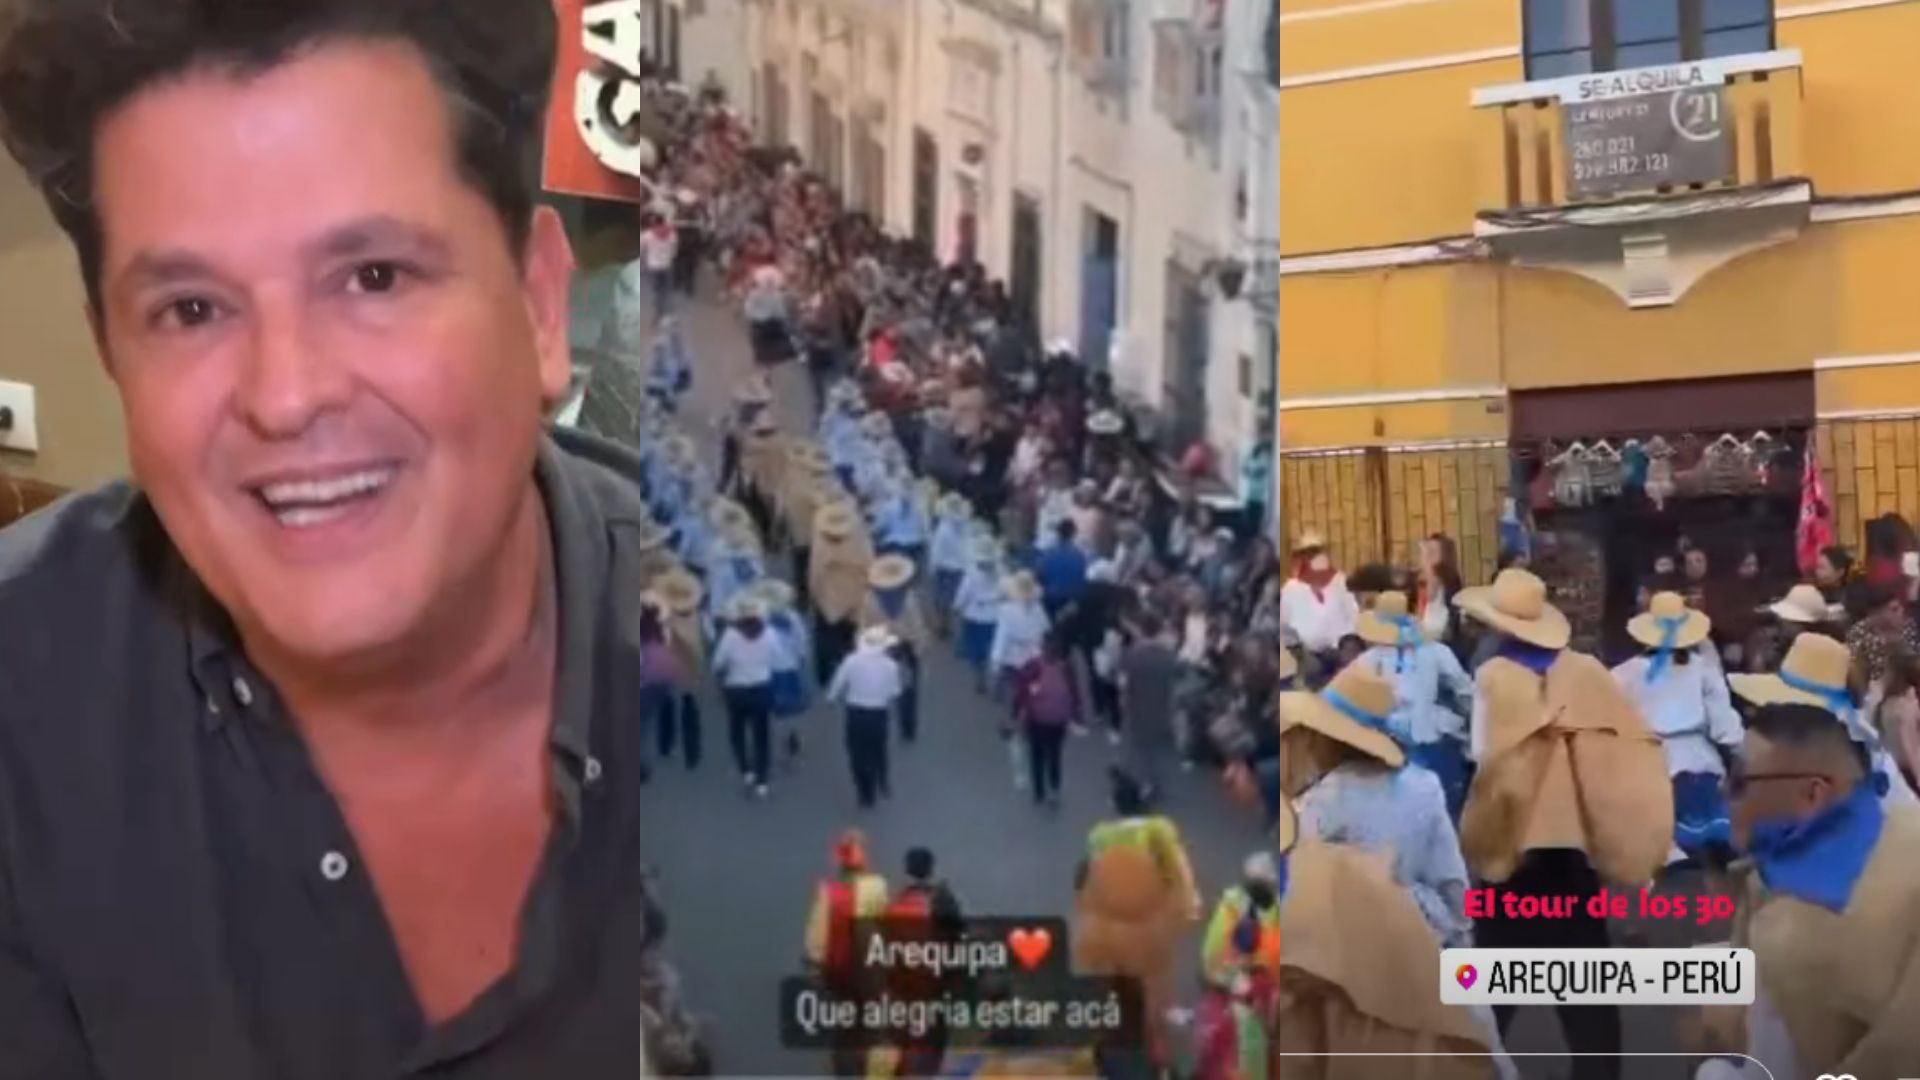 Carlos Vives excited about what is happening in Arequipa on the occasion of his anniversary.  IG Carlos Vives